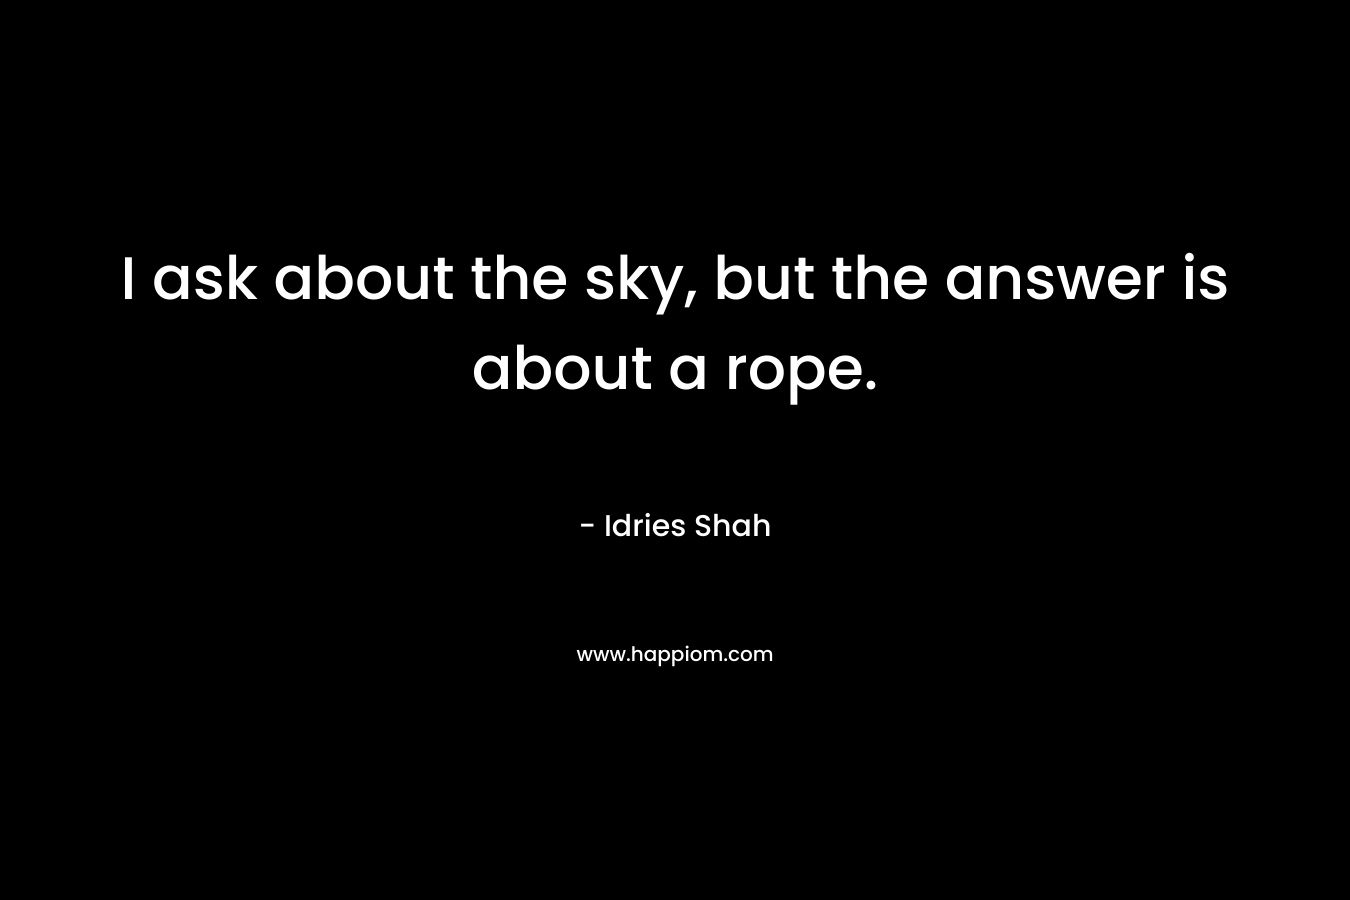 I ask about the sky, but the answer is about a rope. – Idries Shah